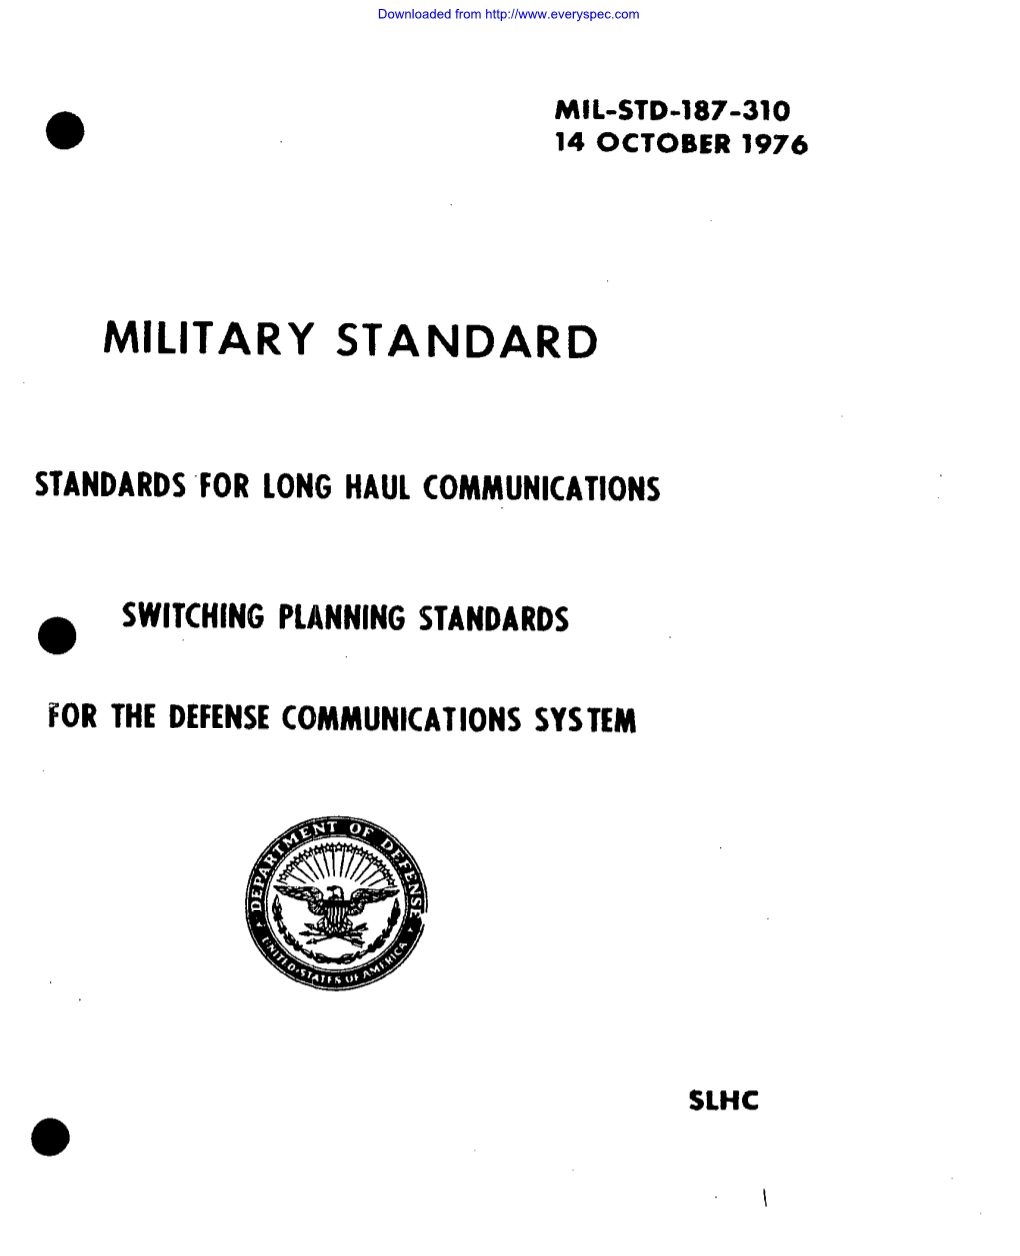 Switching Planning Standards for the Defense Communications System